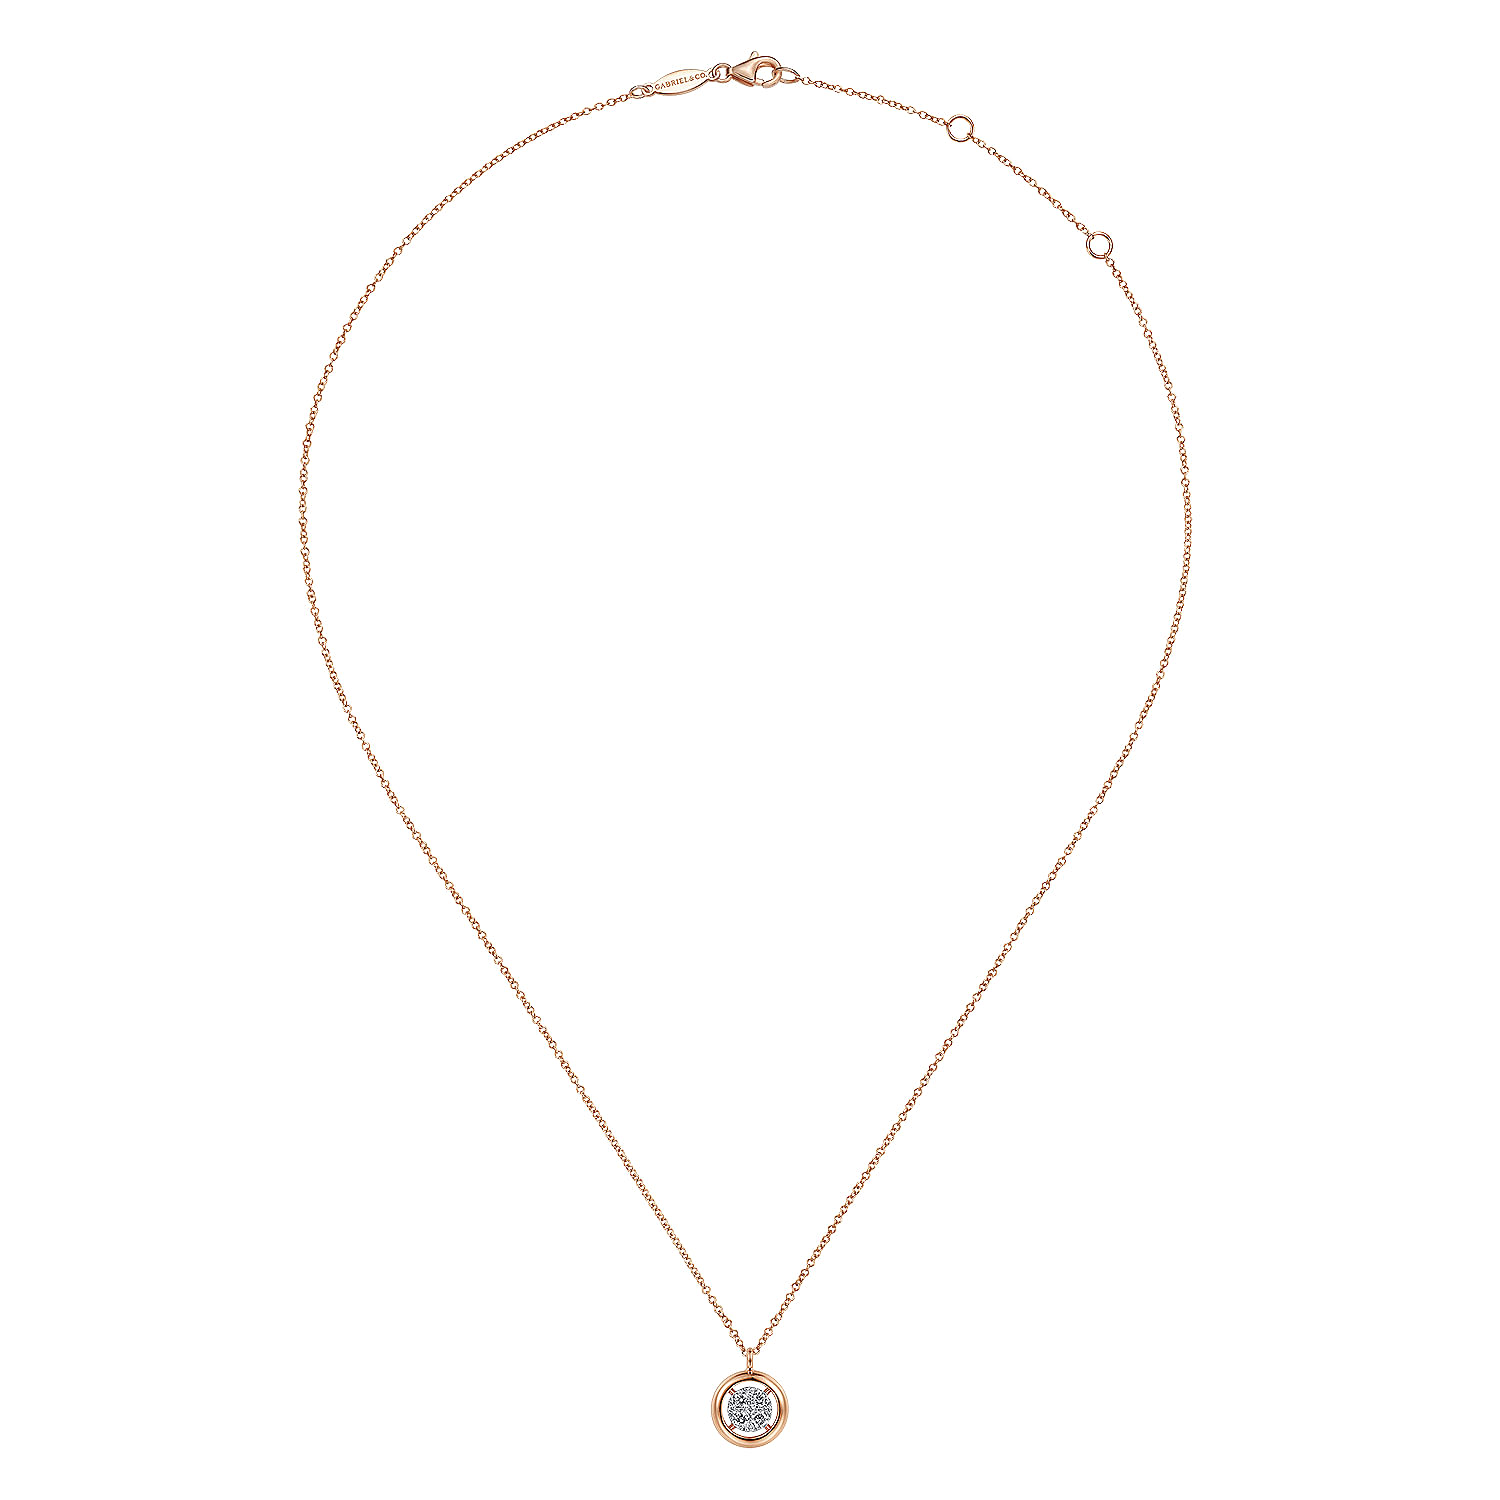 14K Rose Gold Round PavÒ Diamond Floating Pendant Necklace with Wide Border